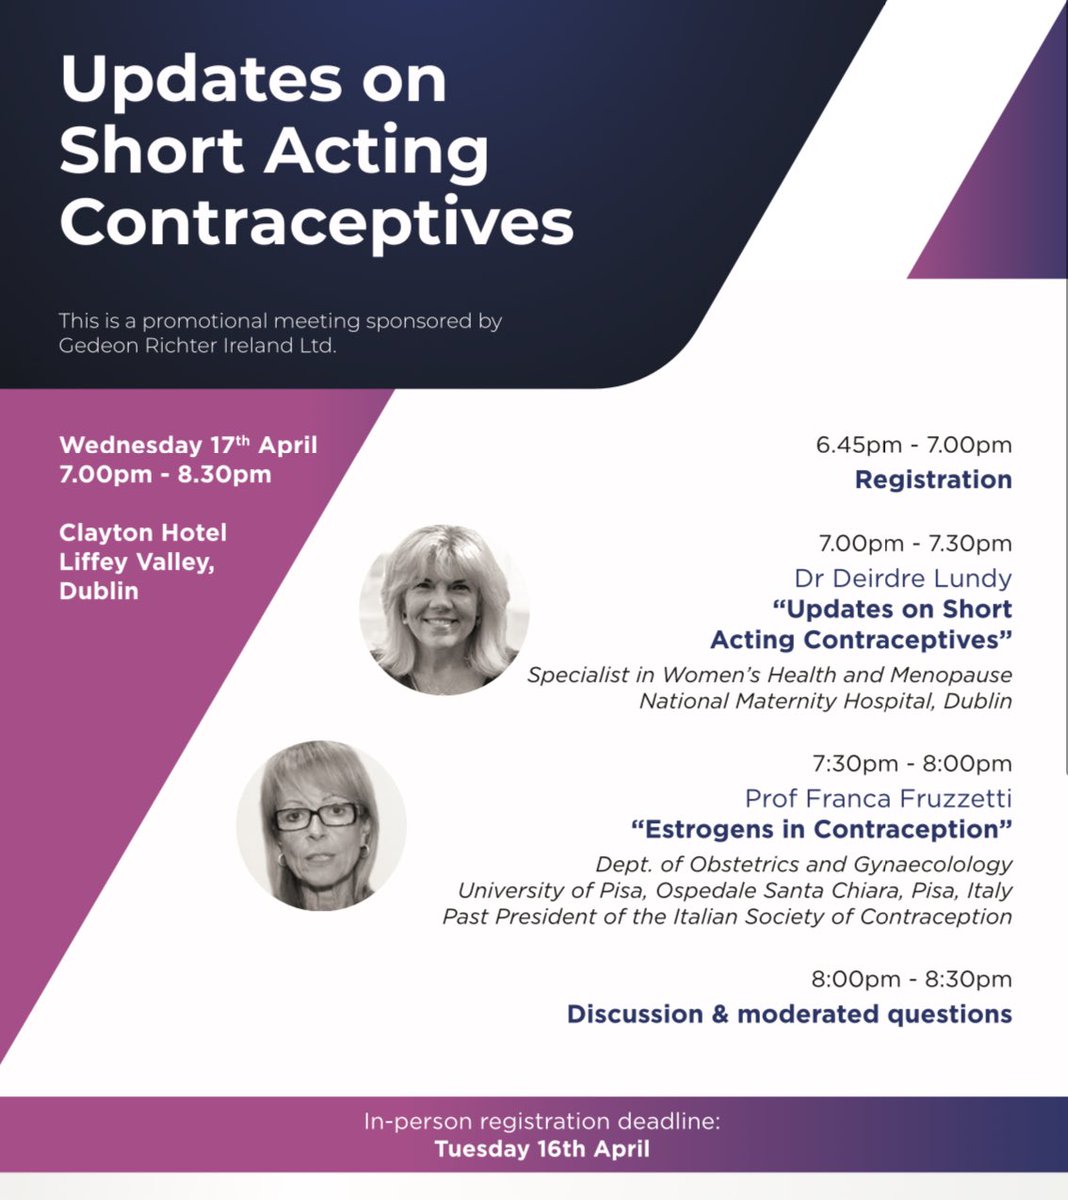 Updates on Short Acting Contraceptives 📅 Today, Wed 17th April ⏰ 7pm 🎤 🗣️Dr Deirdre Lundy• 'Updates on Short Acting Contraceptives' 🗣️ Prof Franca Fruzzetti 'Estrogens in Contraception' See agenda ⬇️ 🙋🏼‍♂️Q&A Click below 👇🏻 to join: medcafe.ie/users/sign_in